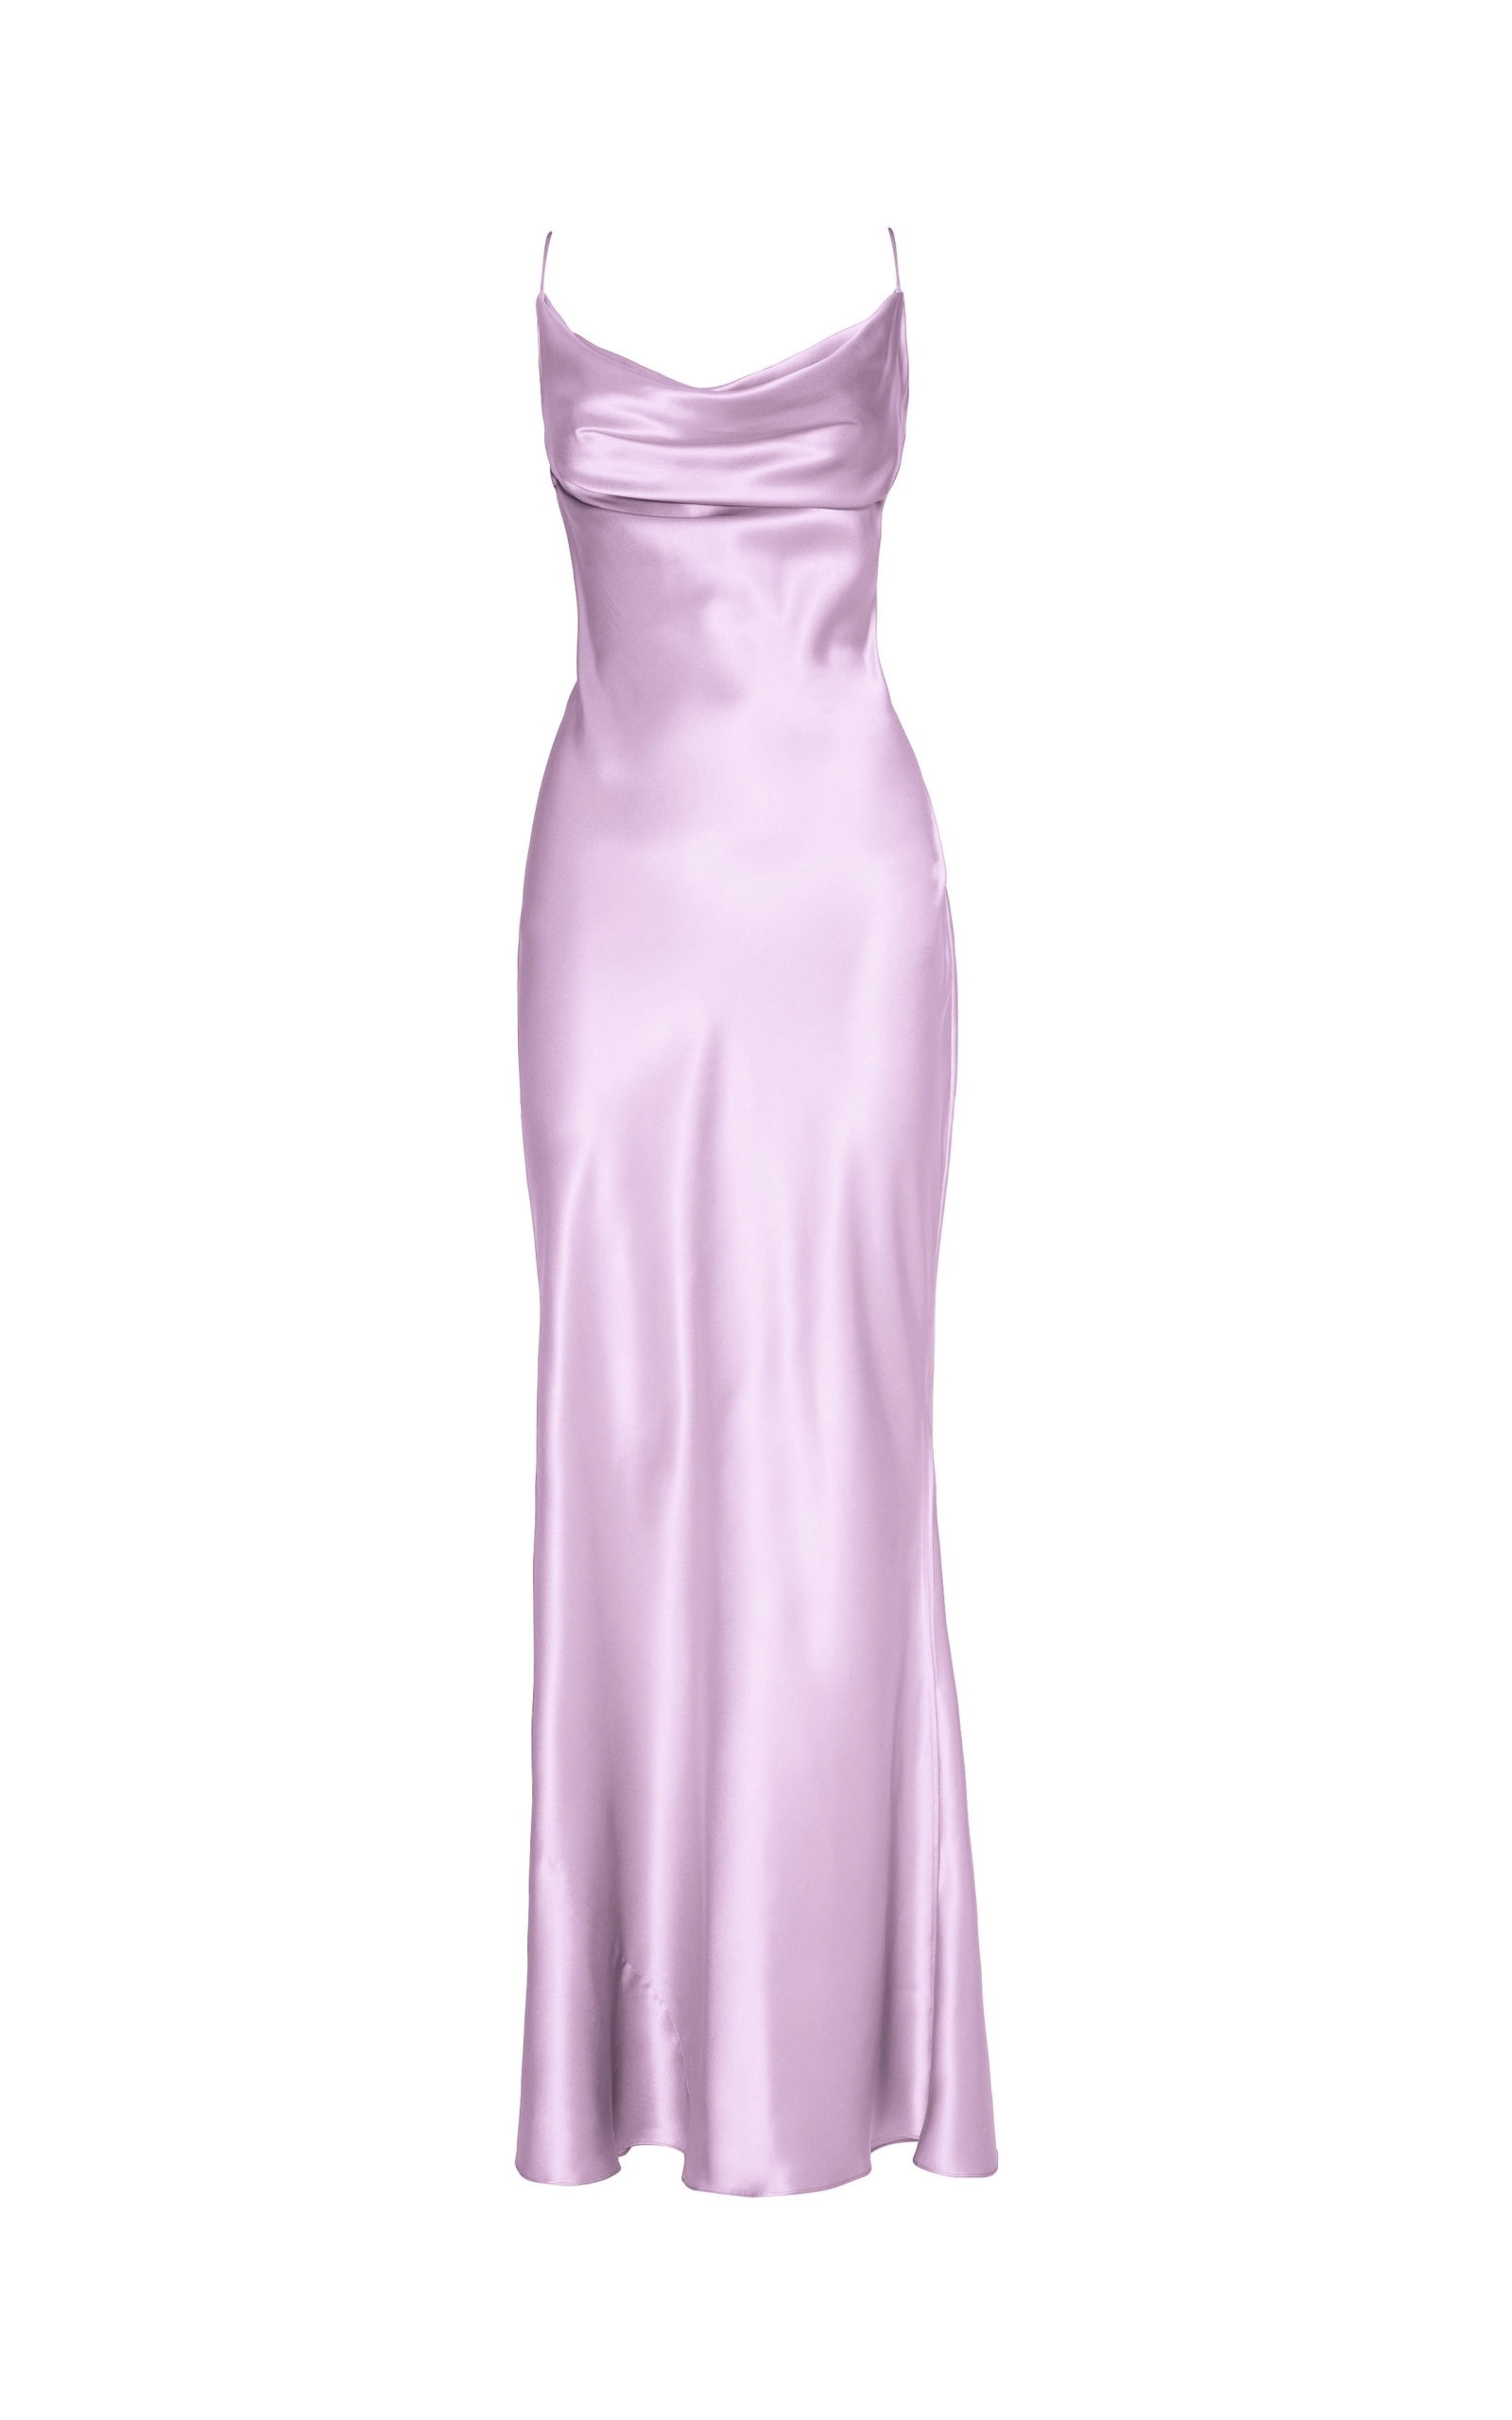 lilac dress front